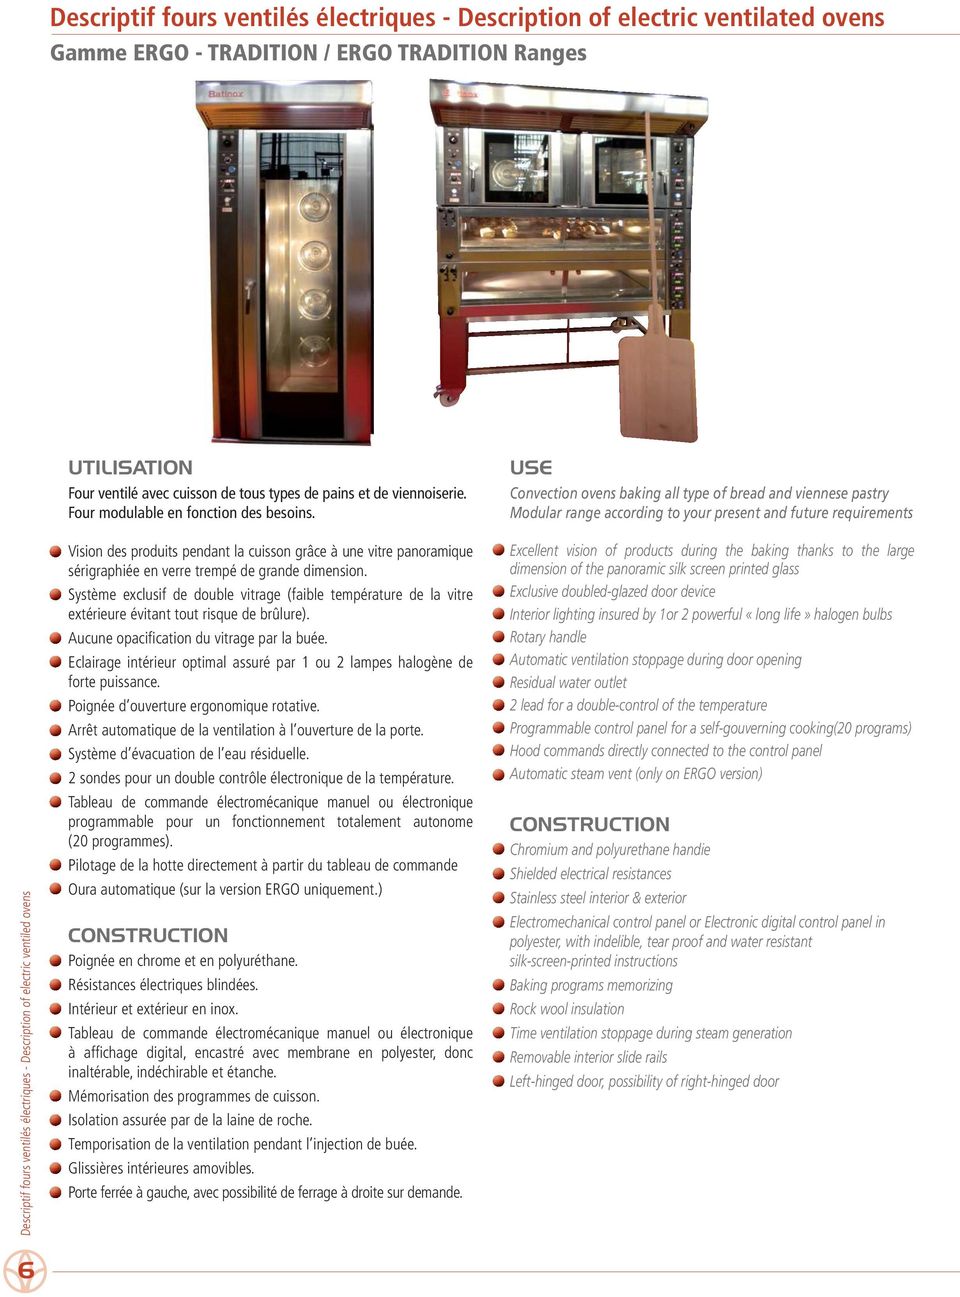 USE Convection ovens baking all type of bread and viennese pastry Modular range according to your present and future requirements Descriptif fours ventilés électriques - Description of electric